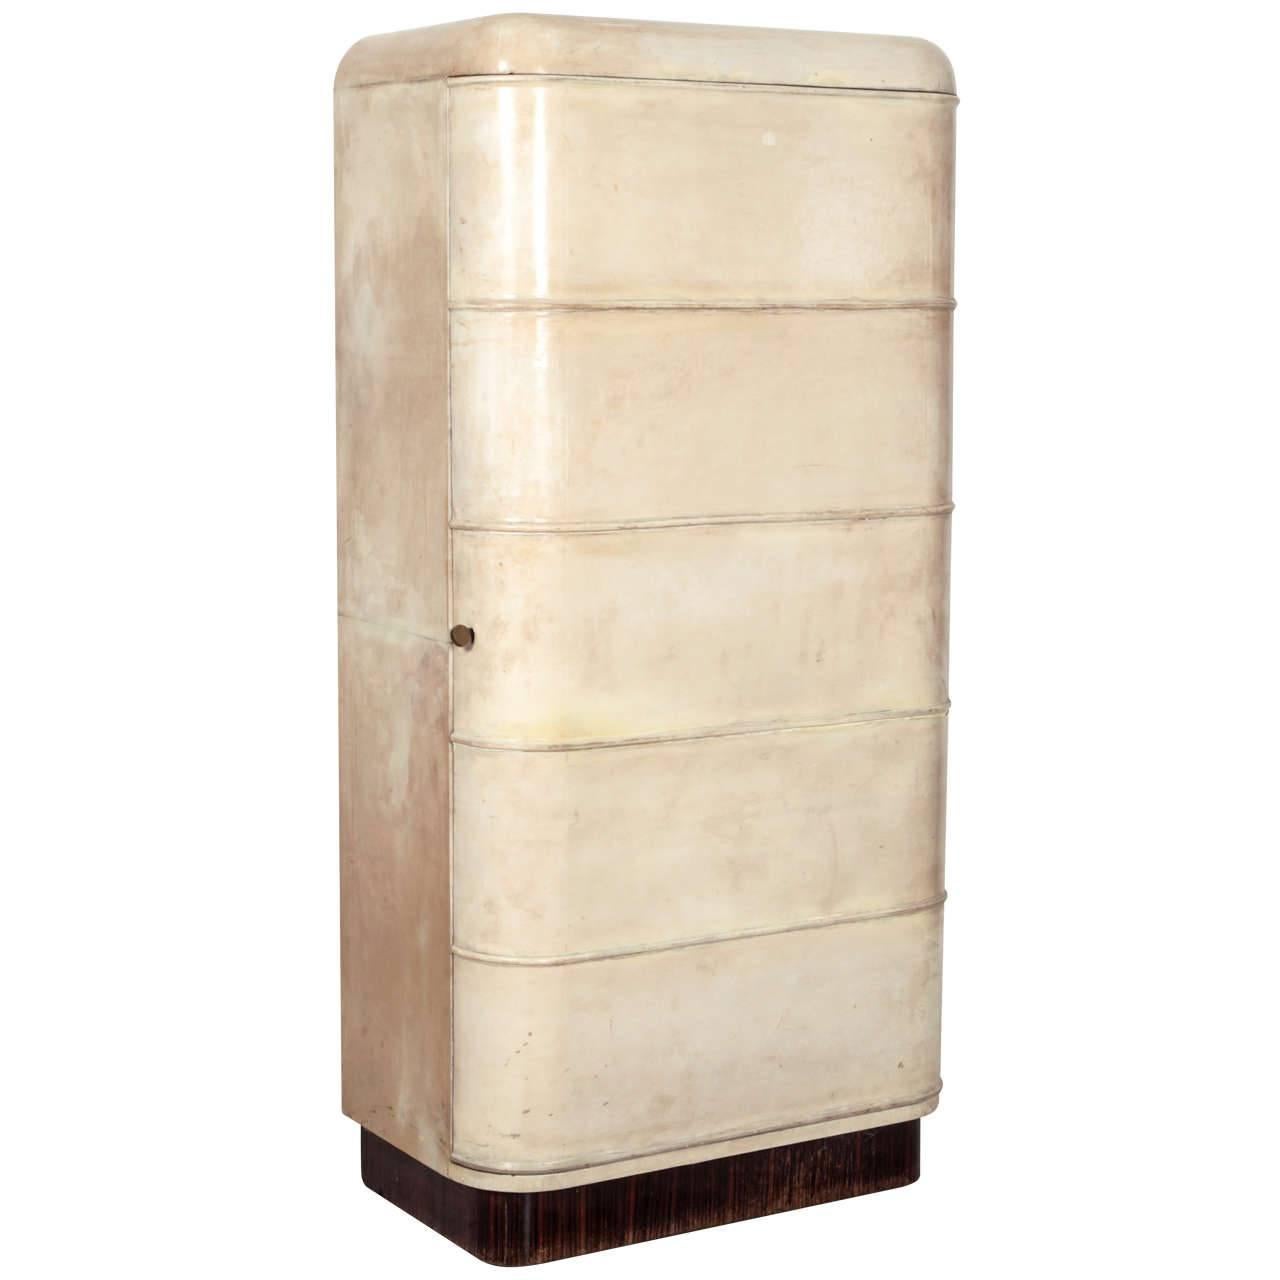 Rare Art Deco Parchment Semainier Cabinet by Jacques Adnet, French, 1930s For Sale